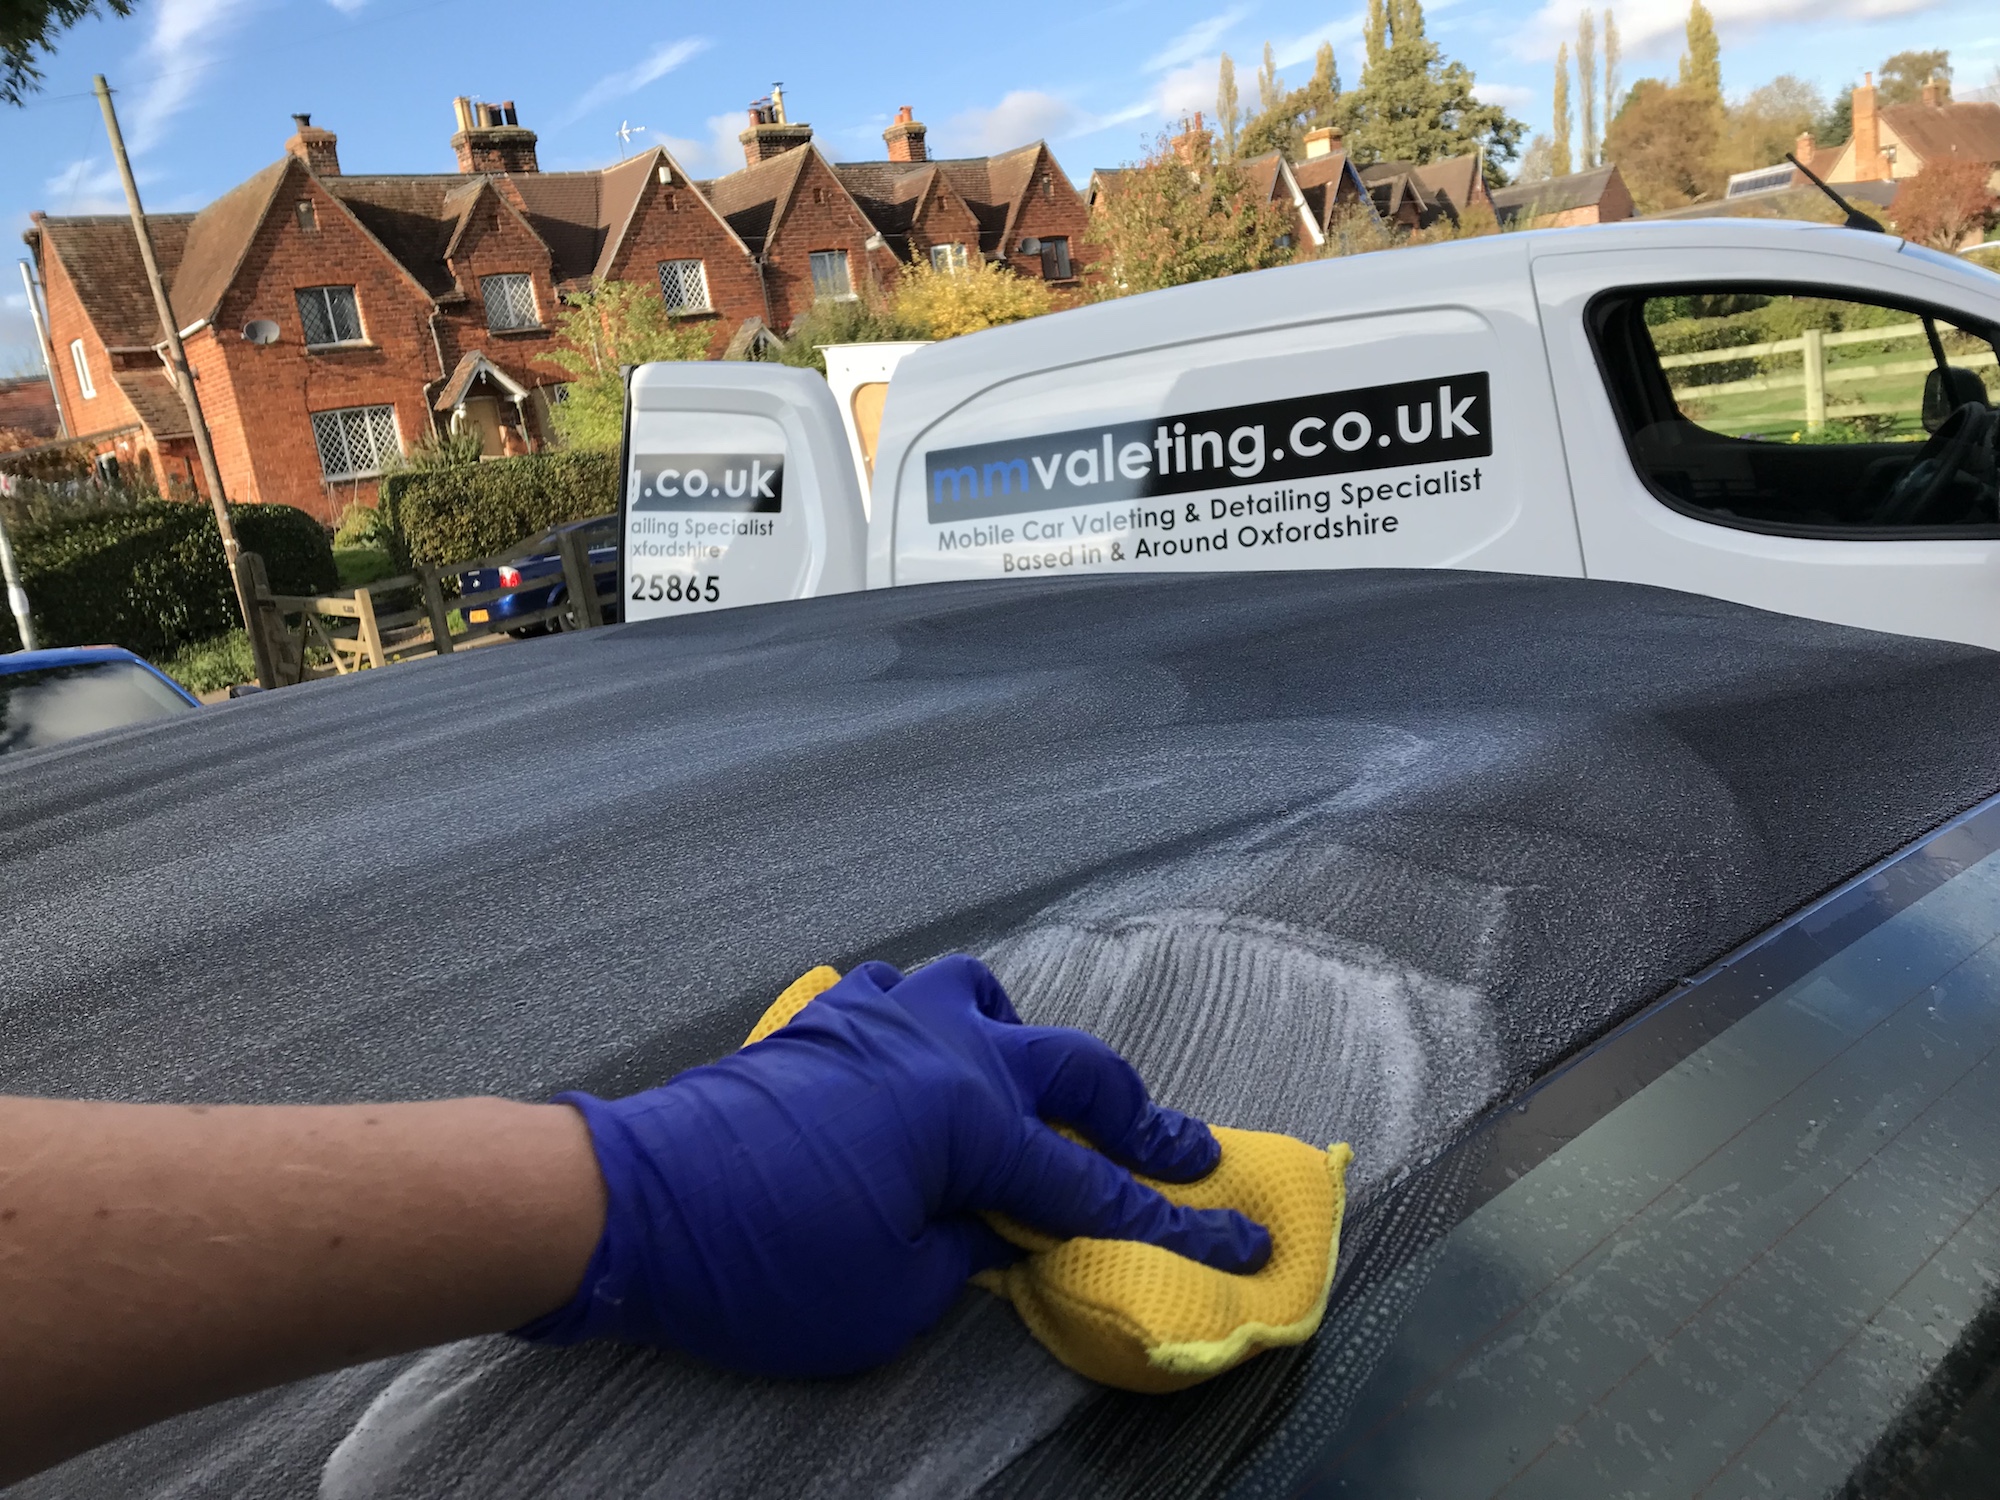 Fabric Hood cleaning for your vehicle. A specialist service provided by mmvaleting in Buckinghamshire.